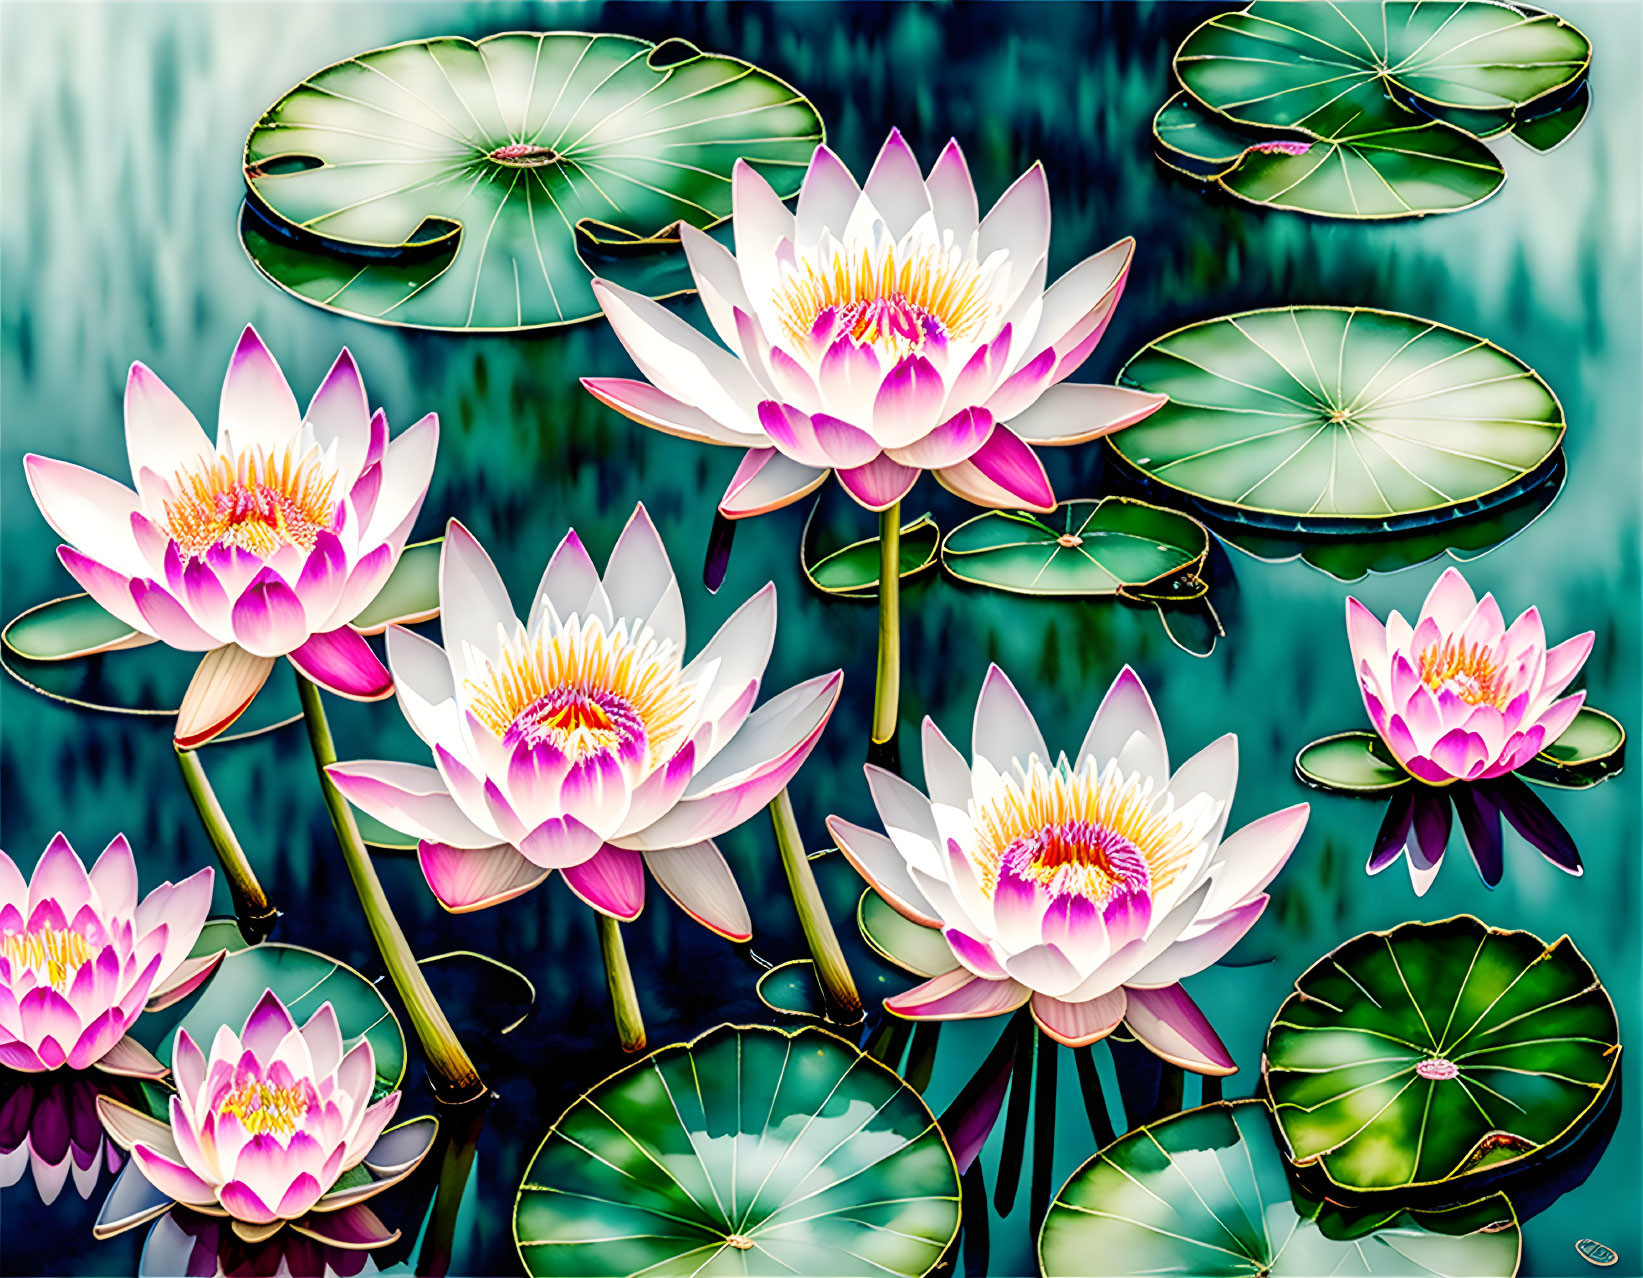 Pink and White Water Lilies on Blue Water Background